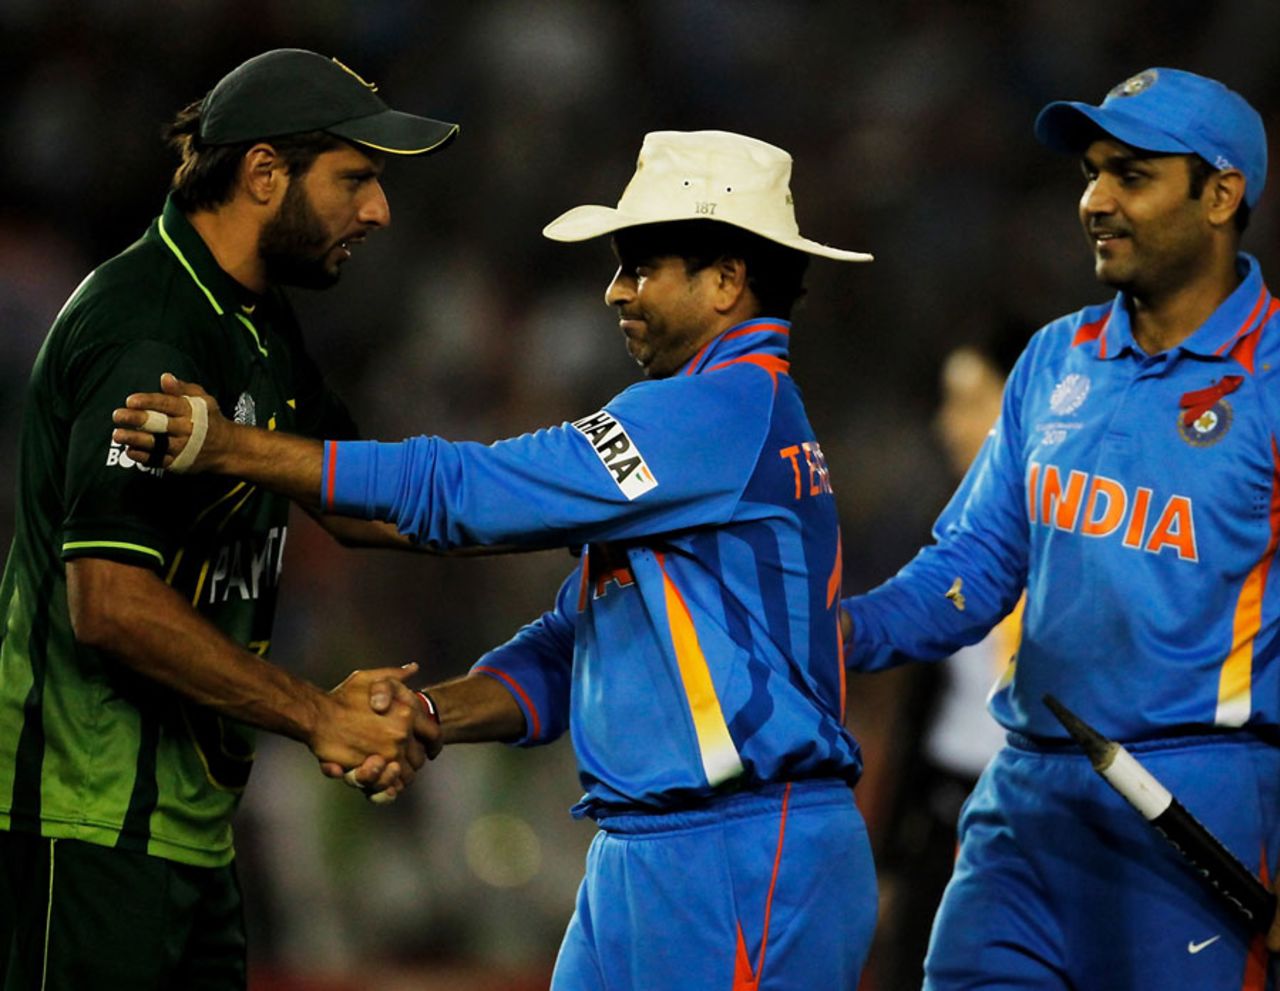 Shahid Afridi congratulates Sachin Tendulkar and Virender Sehwag after the hard-fought game, India v Pakistan, 2nd semi-final, World Cup 2011, Mohali, March 30, 2011